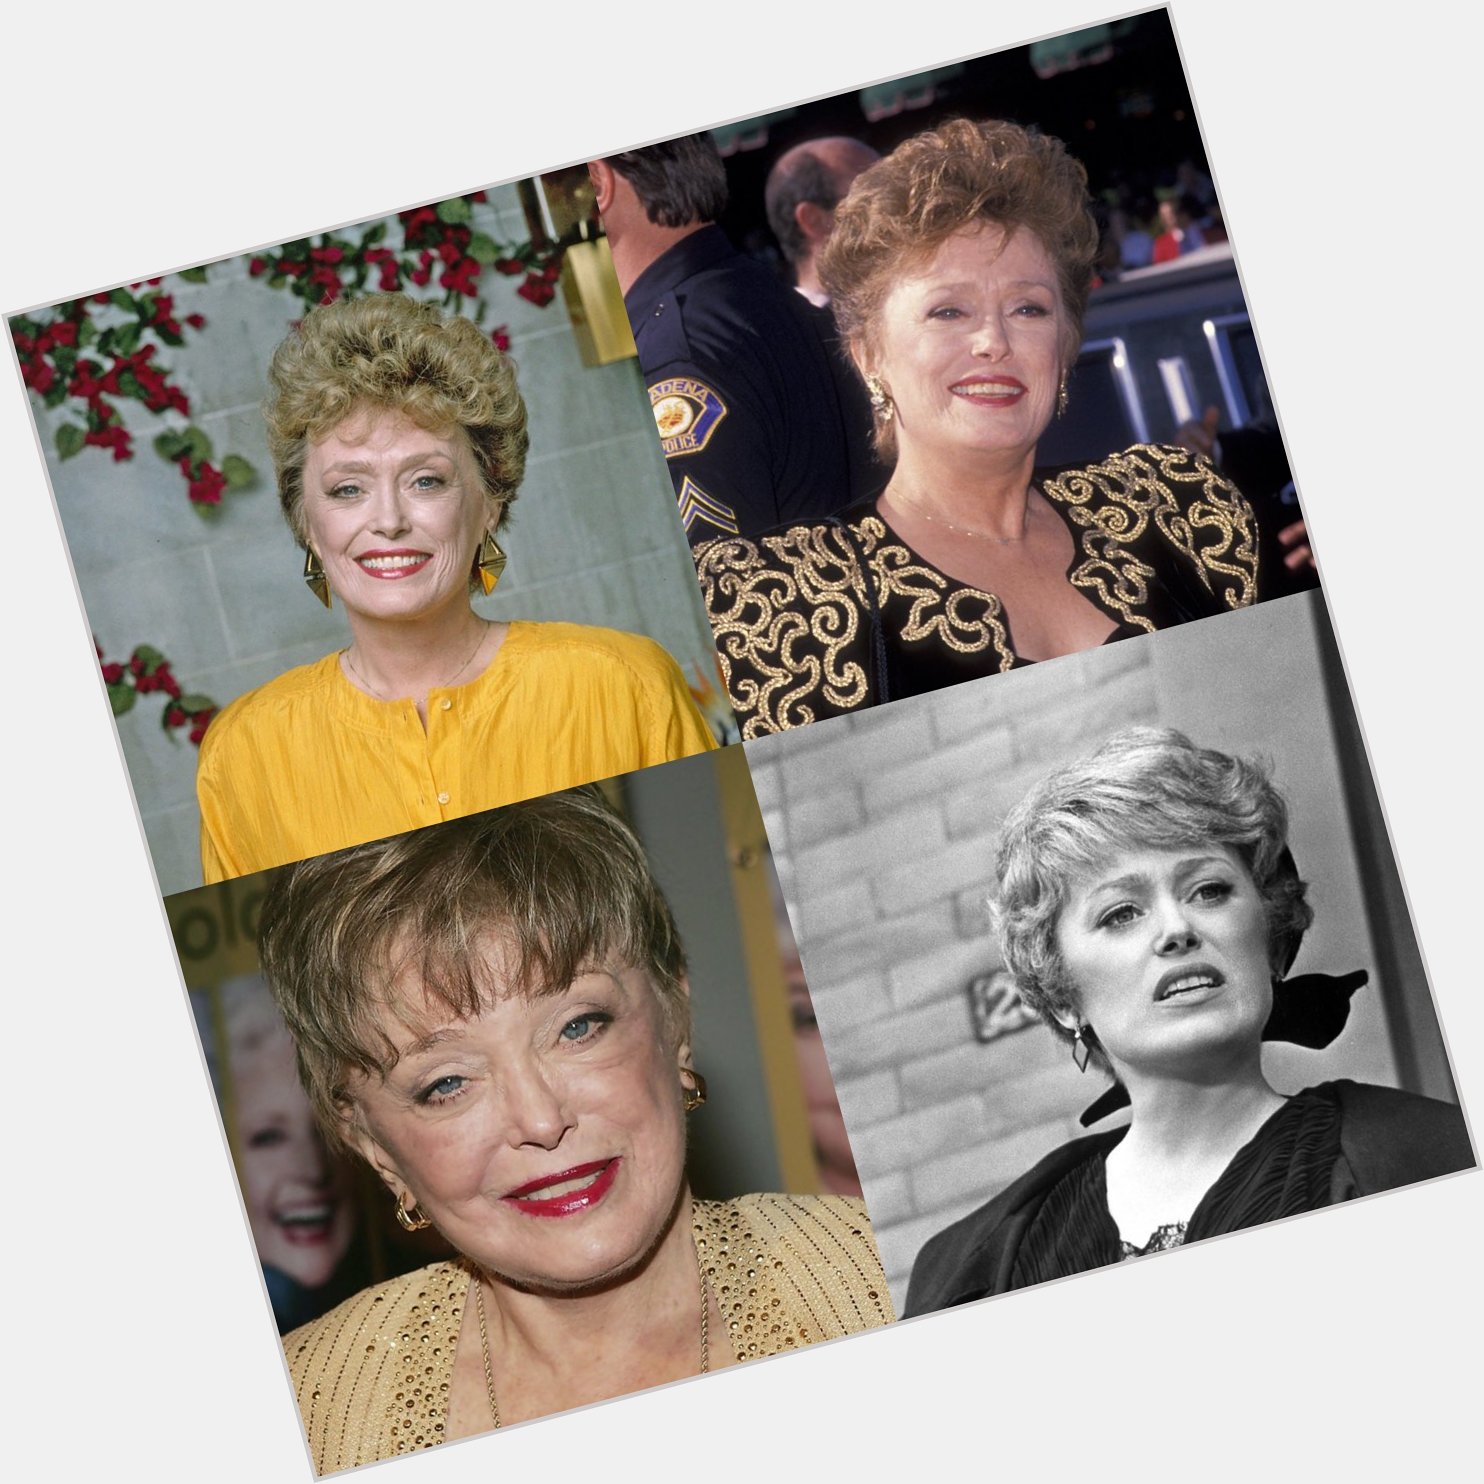 Happy 87 birthday to Rue McClanahan up in heaven. May she Rest In Peace.        